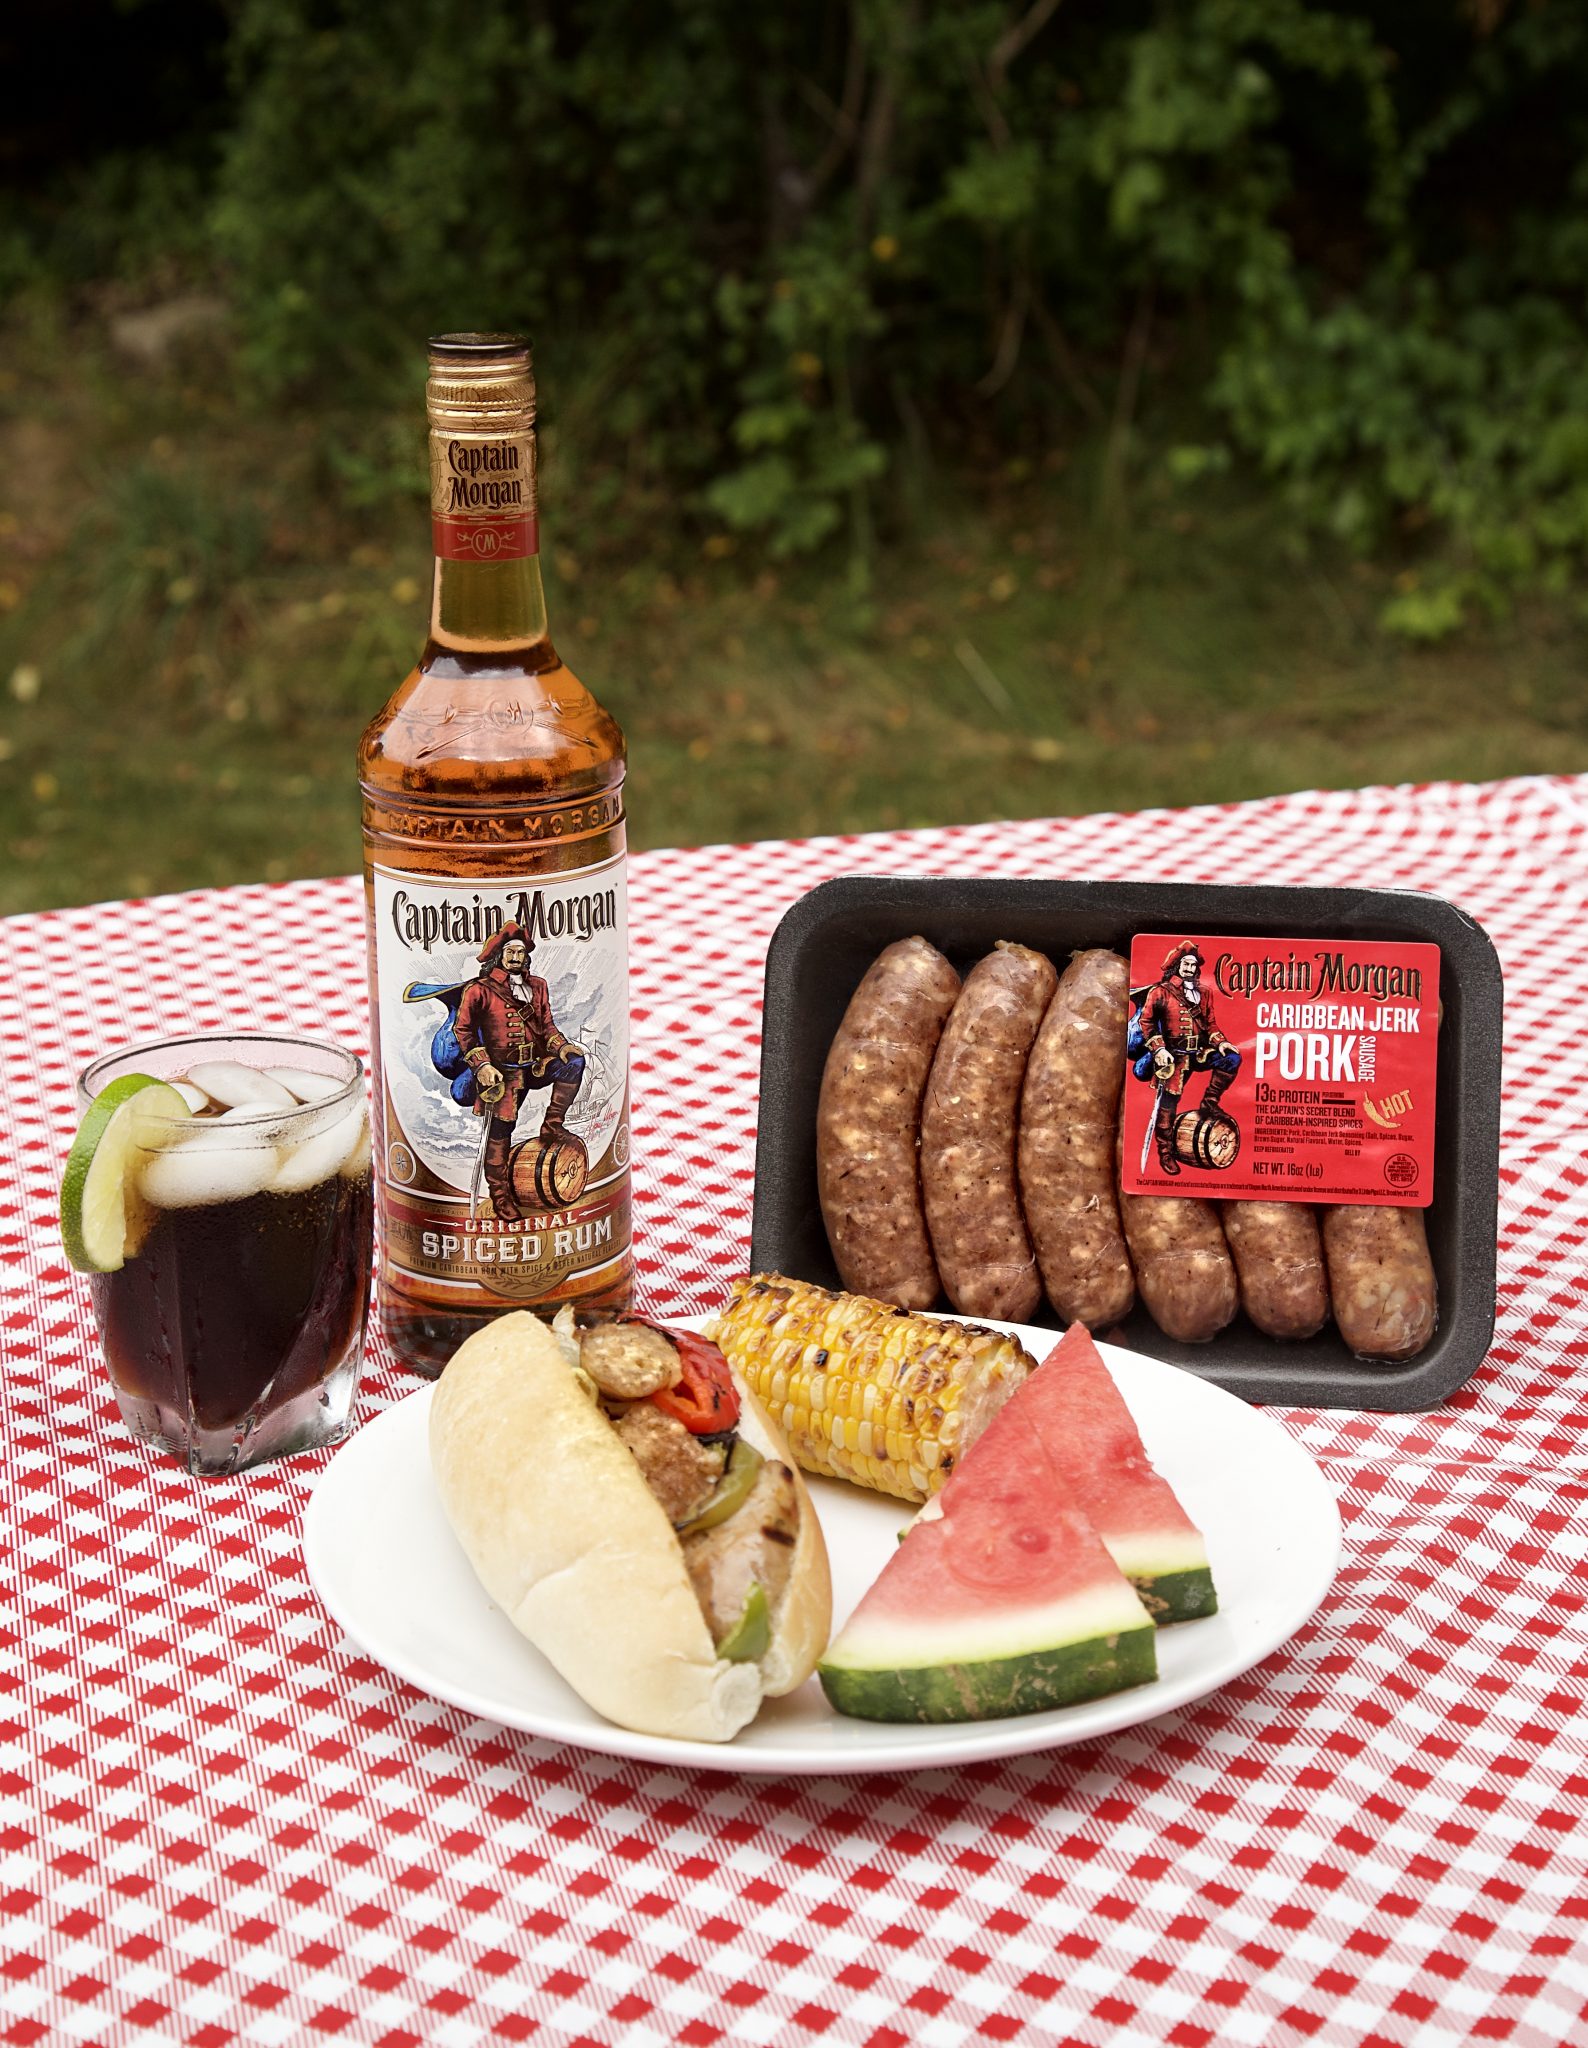 There’s More Fun To Be Had This Summer! Captain Morgan Enters Meat Category With Partnership With Three Little Pigs For SausagesITH 3 LITTLE PIGS LLC image